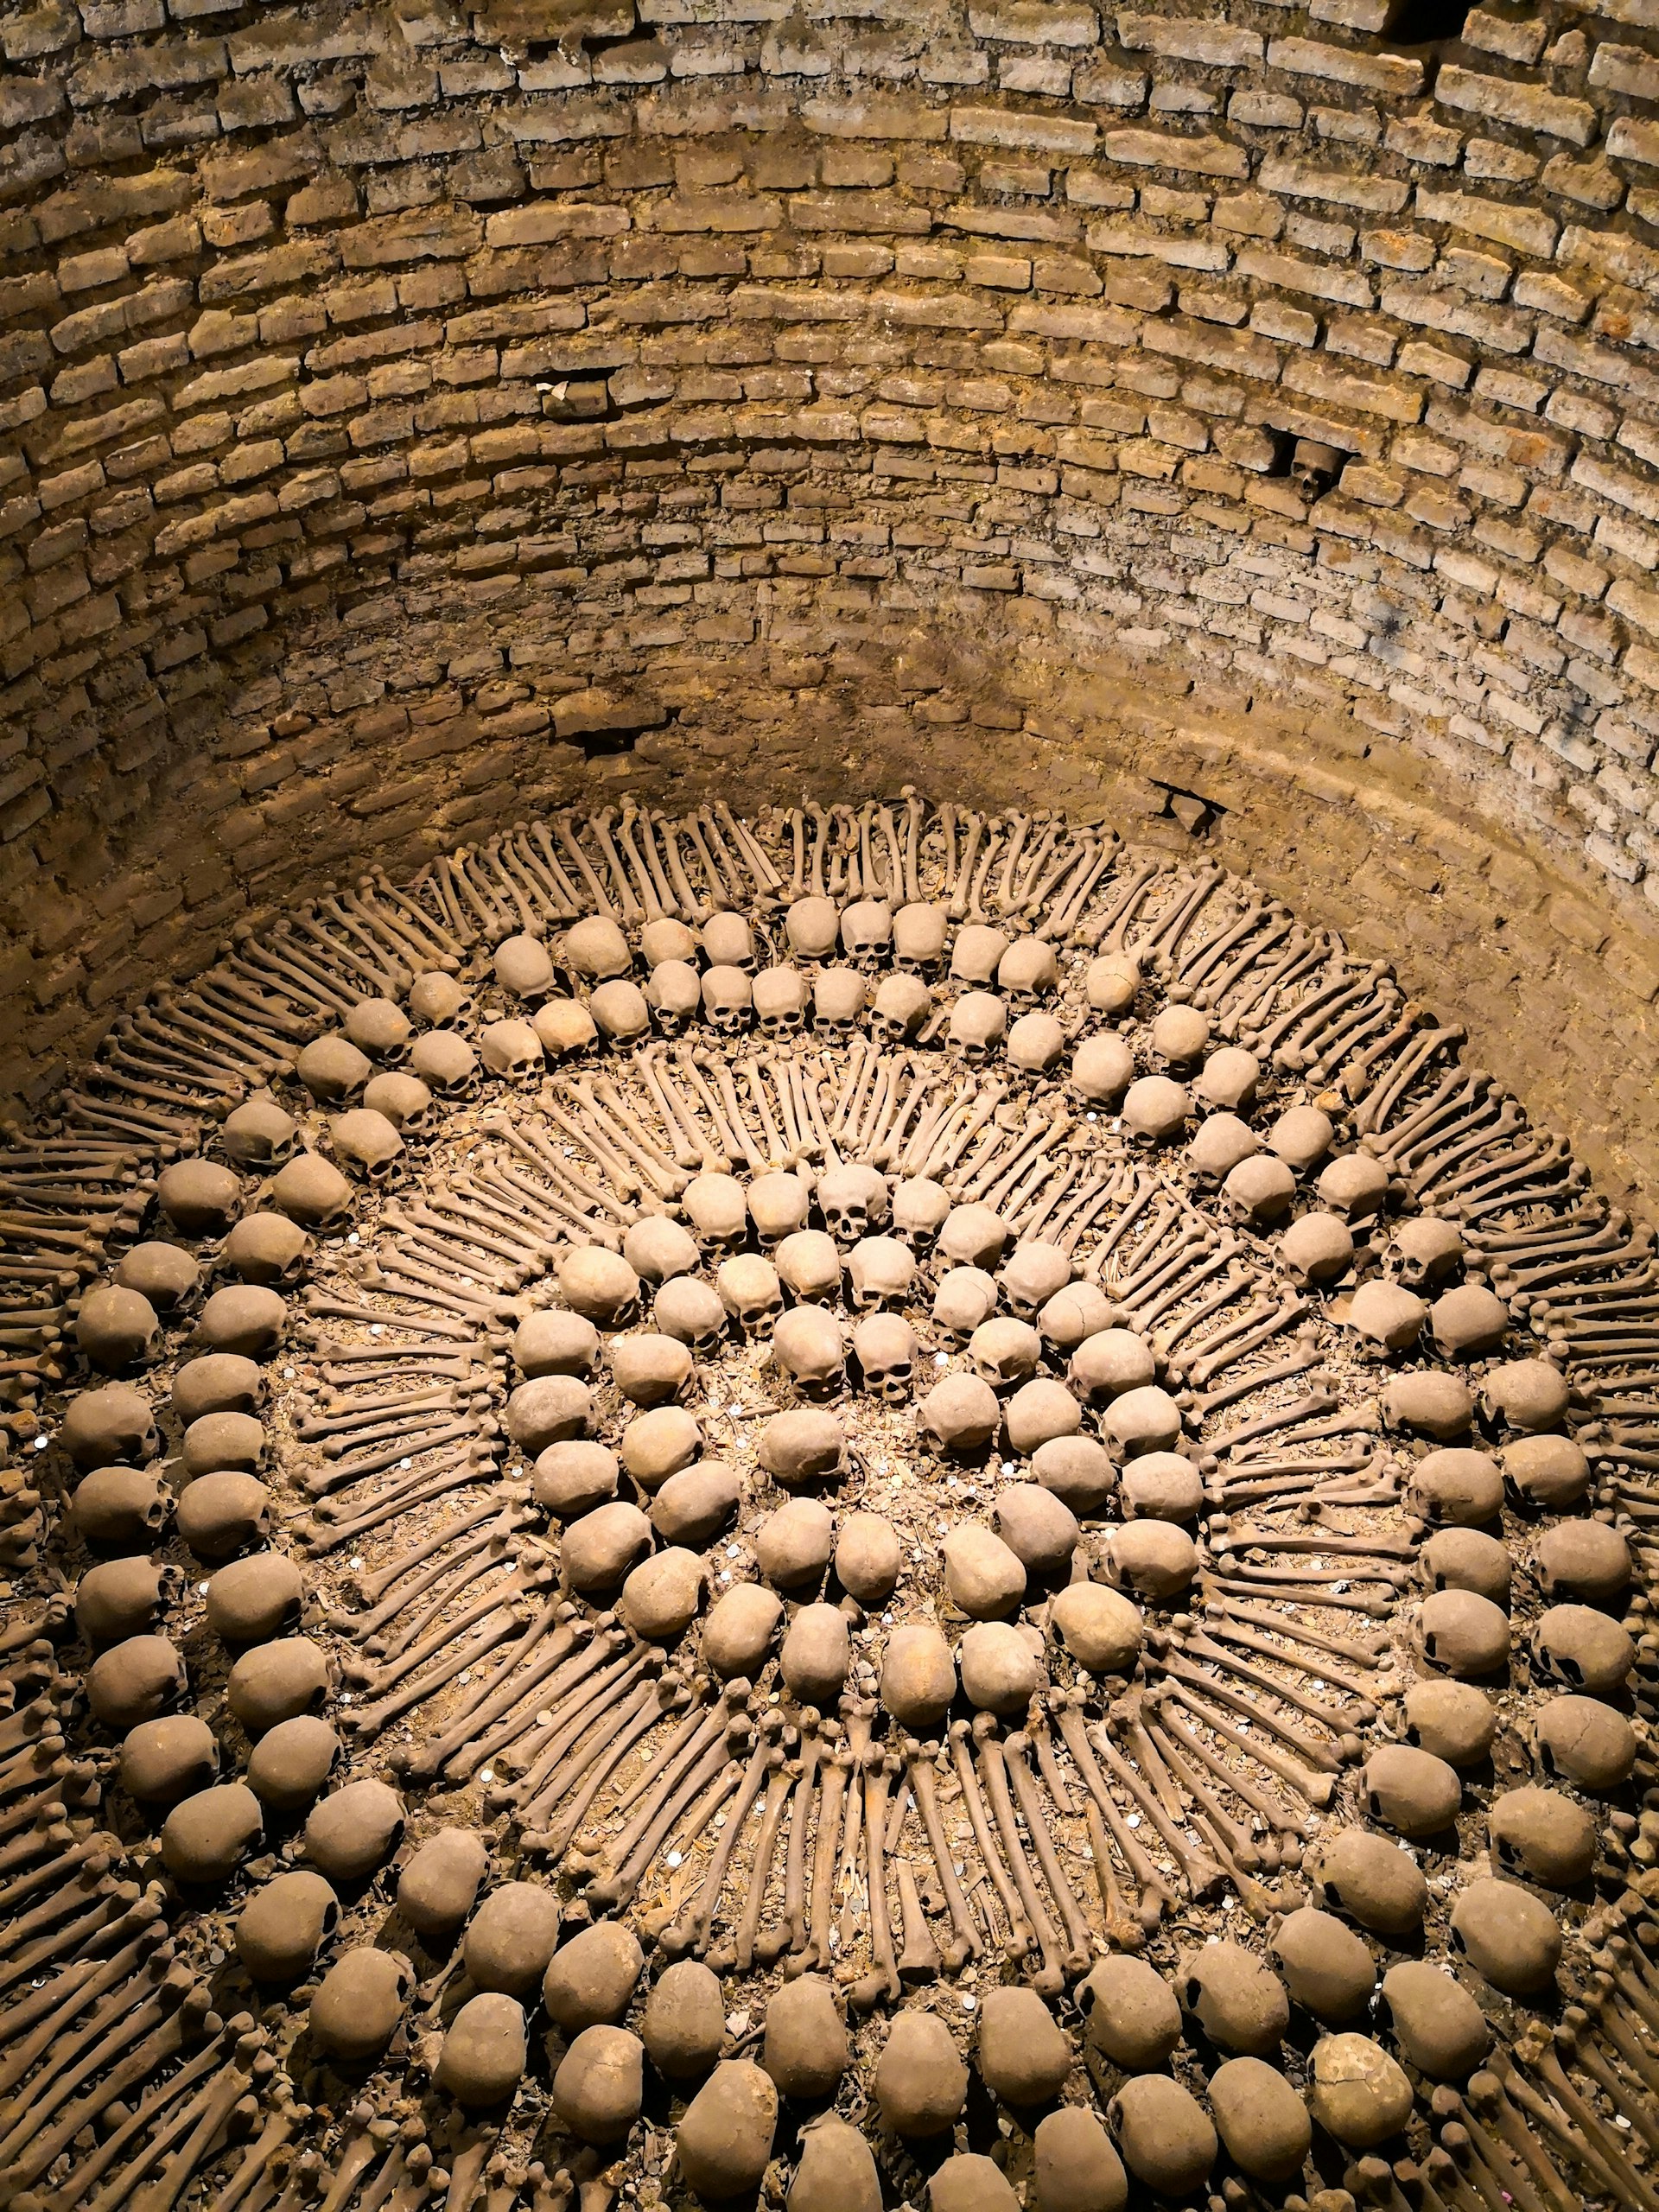 Bones laid out geometrically in the catacombs beneath The Monasterio de San Francisco, Lima